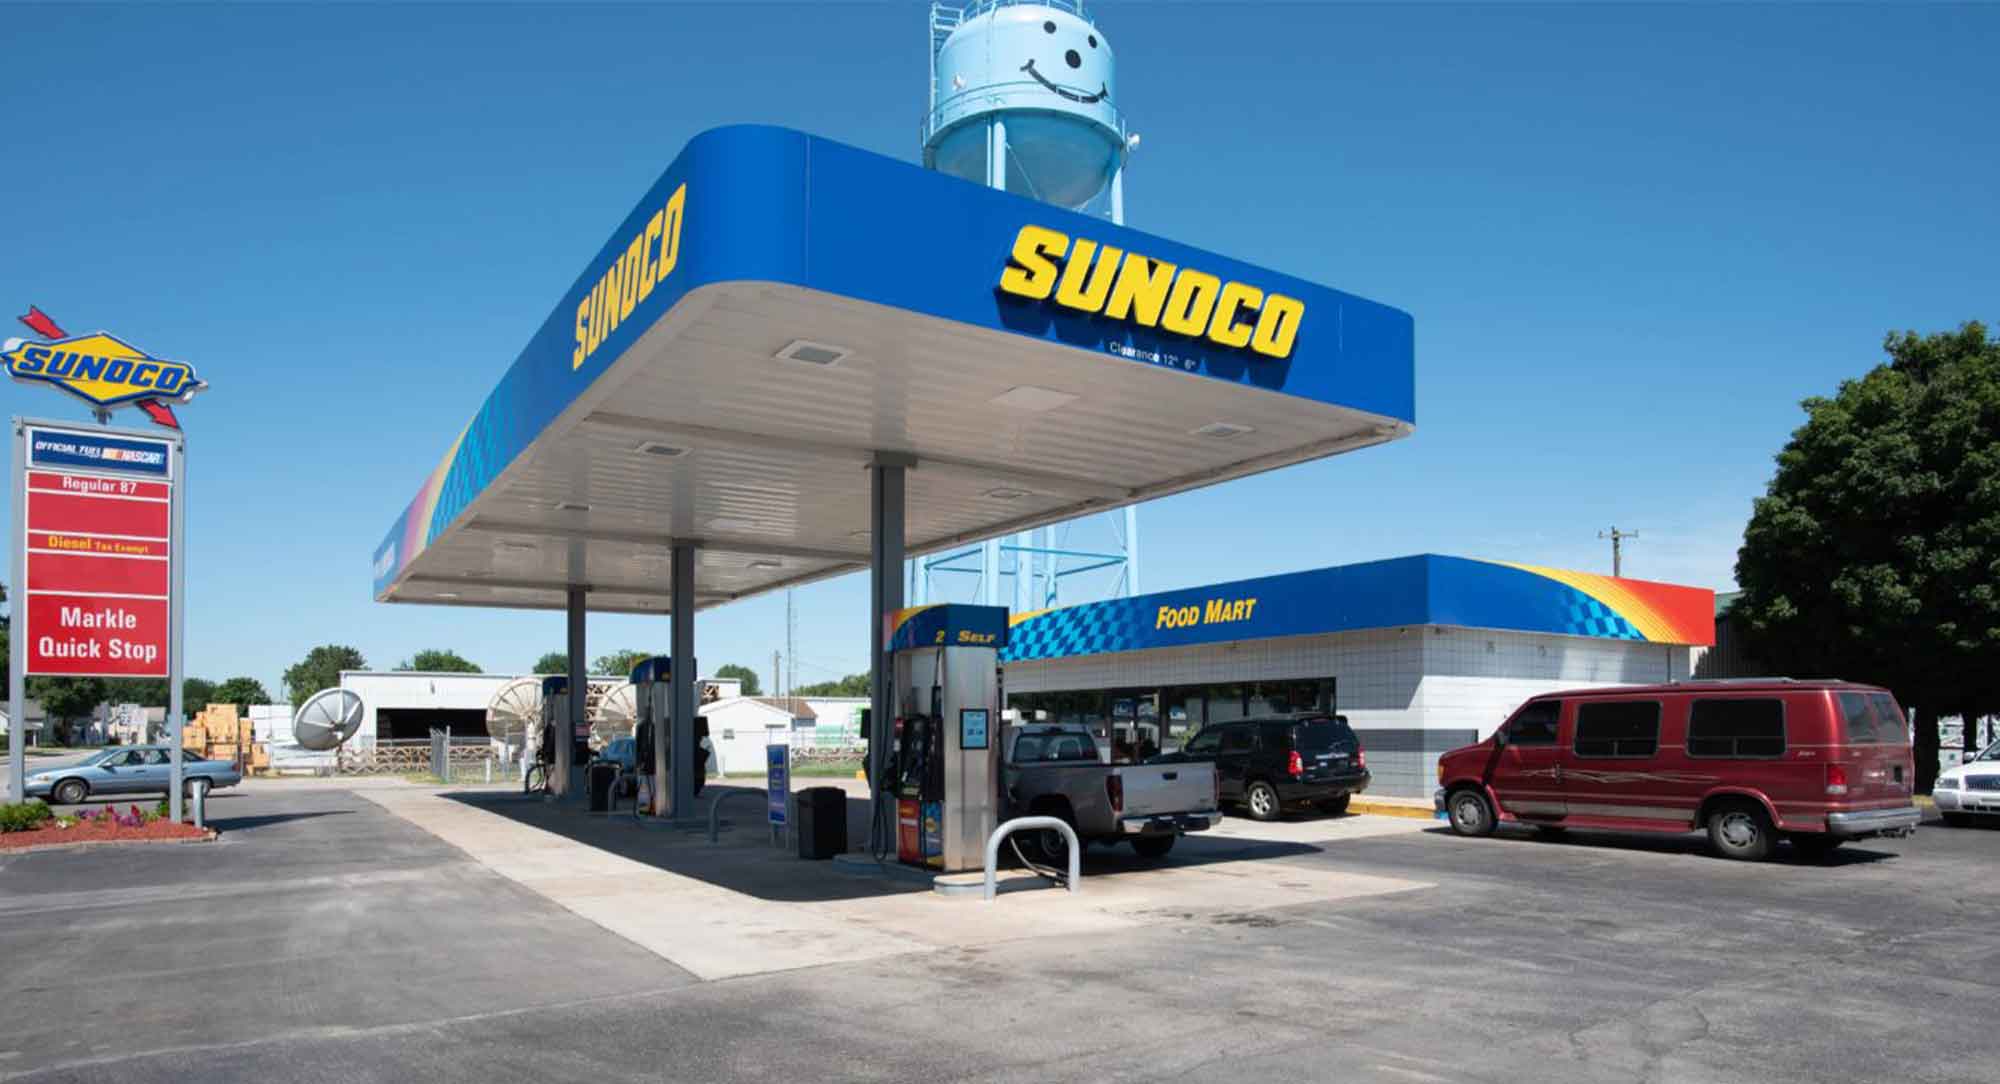 Sunoco Levelwing Clients Independent Digital Marketing Agency